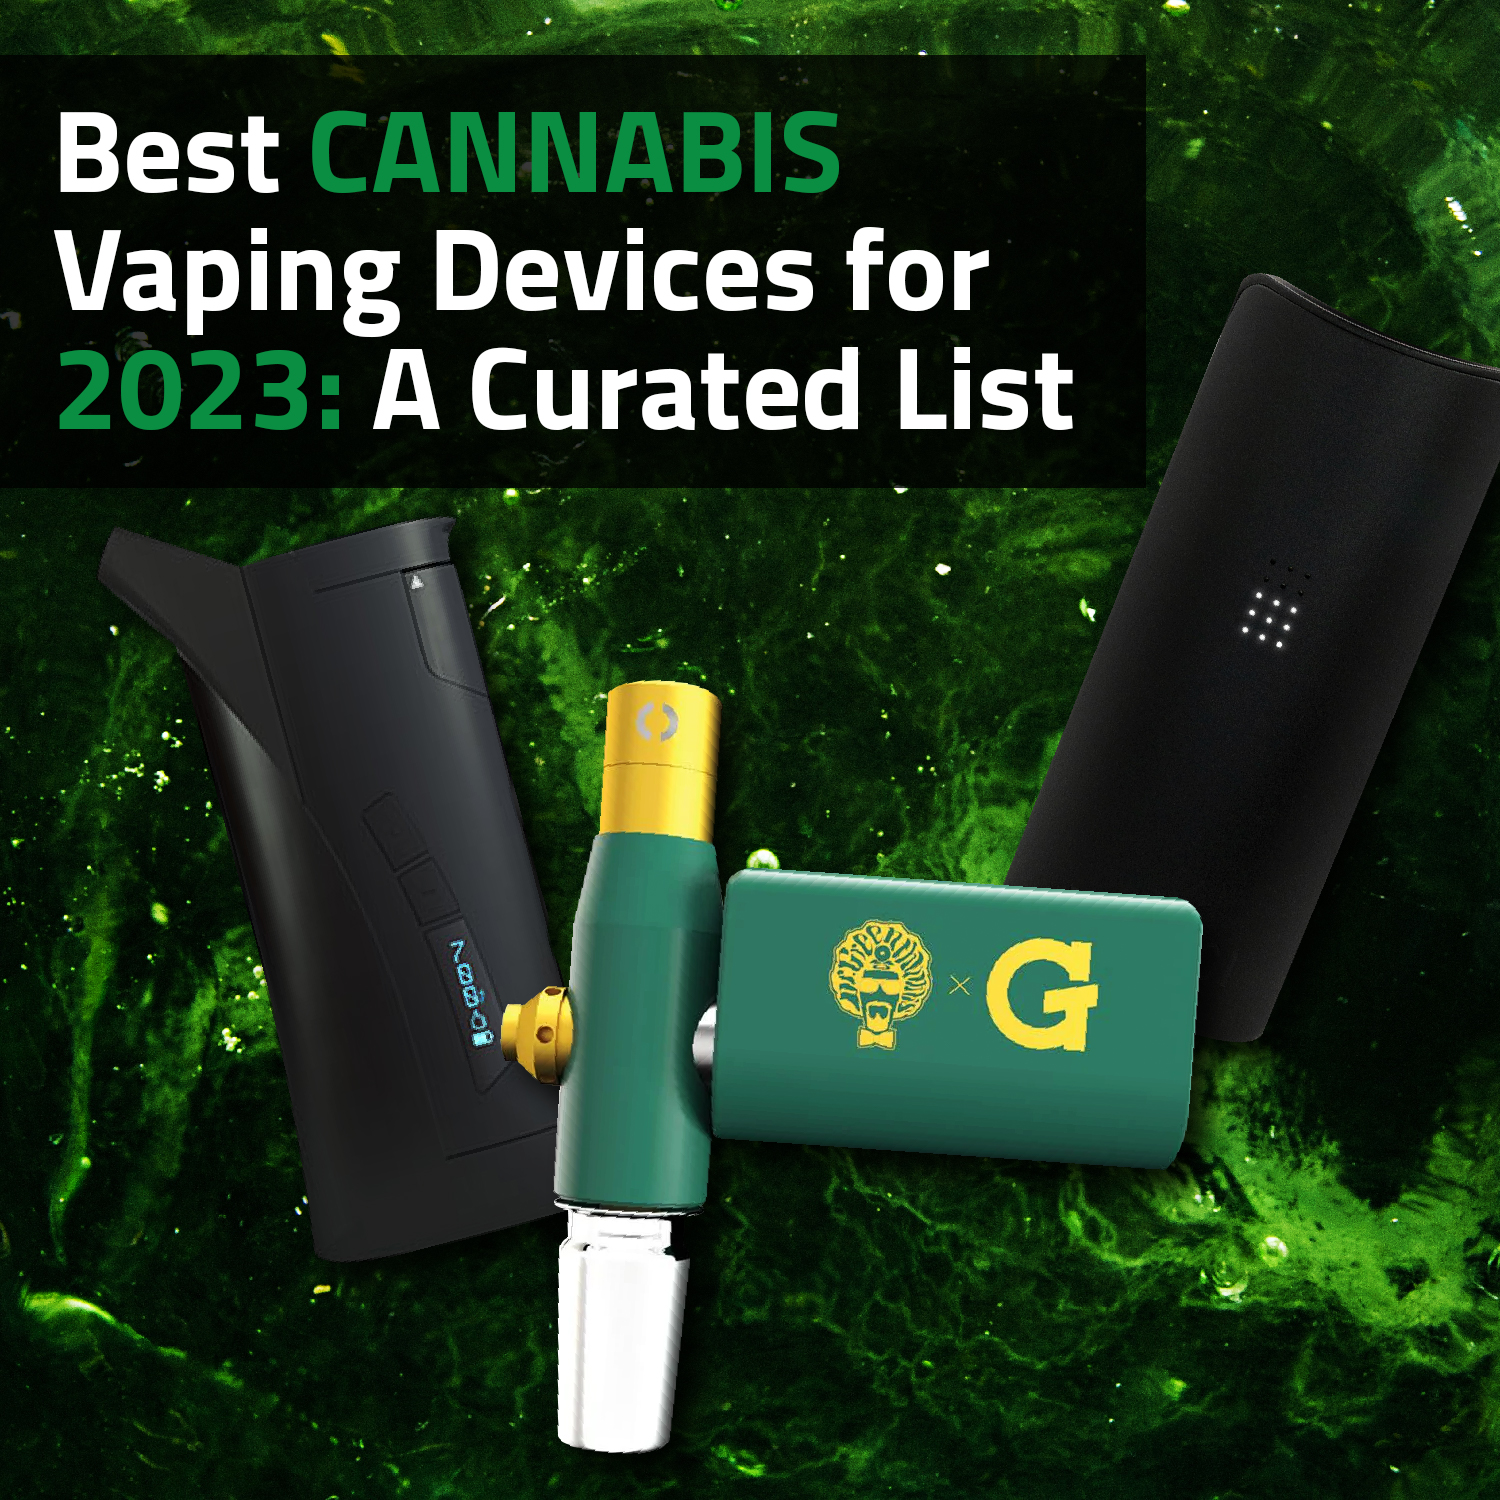 Best Cannabis Vaping Devices For 2023: A Curated List